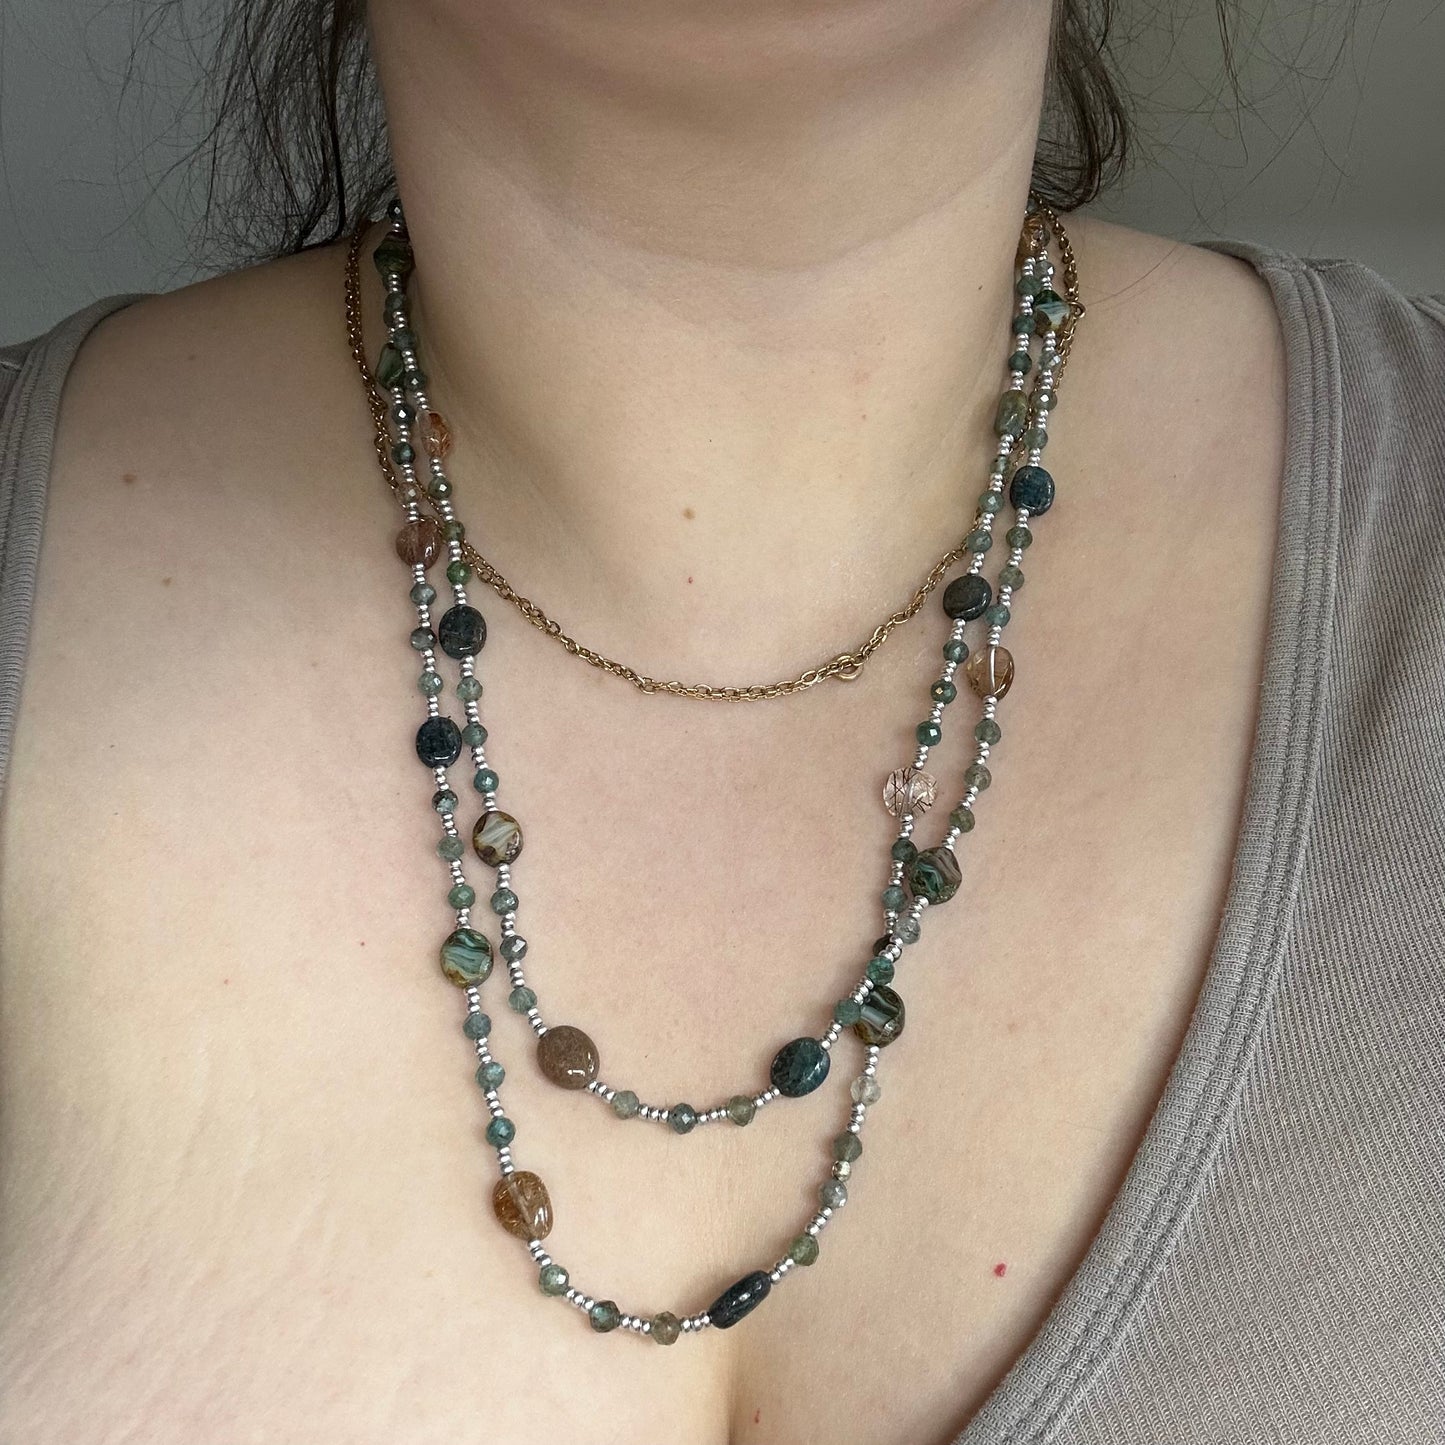 Long layering or wrapping piece with Kyanite, Apatite, Glass, and Rutilated Quartz